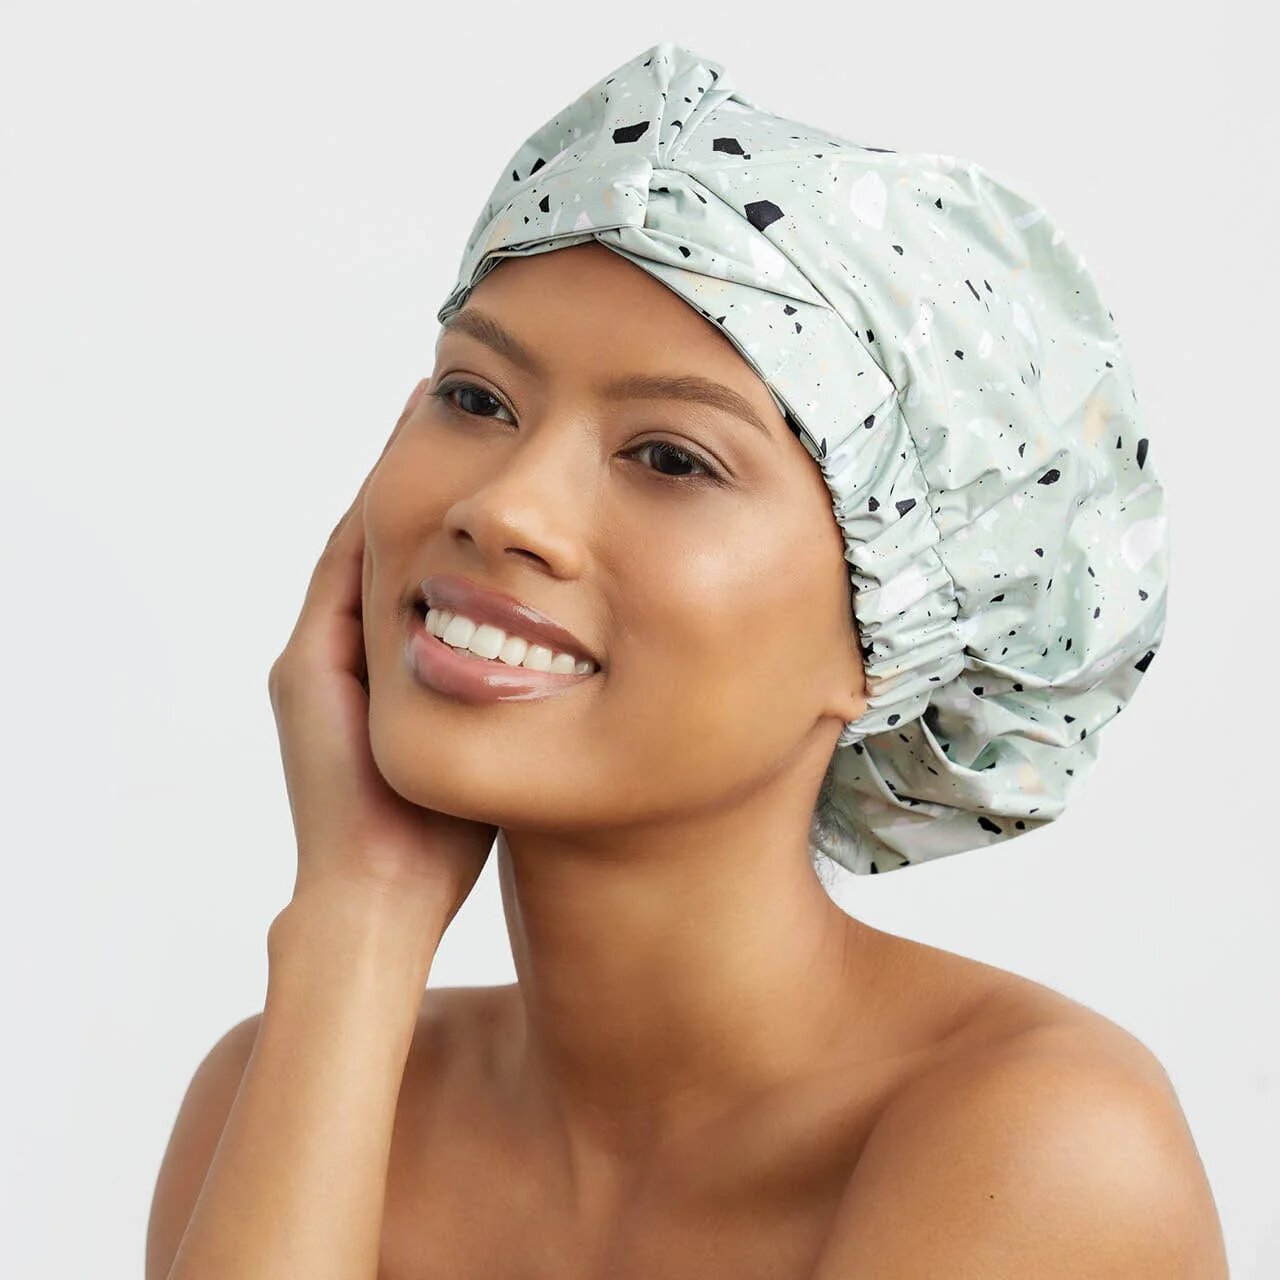 Kitsch Shower Caps: Perfect Gift for the Fashion-Forward Friend